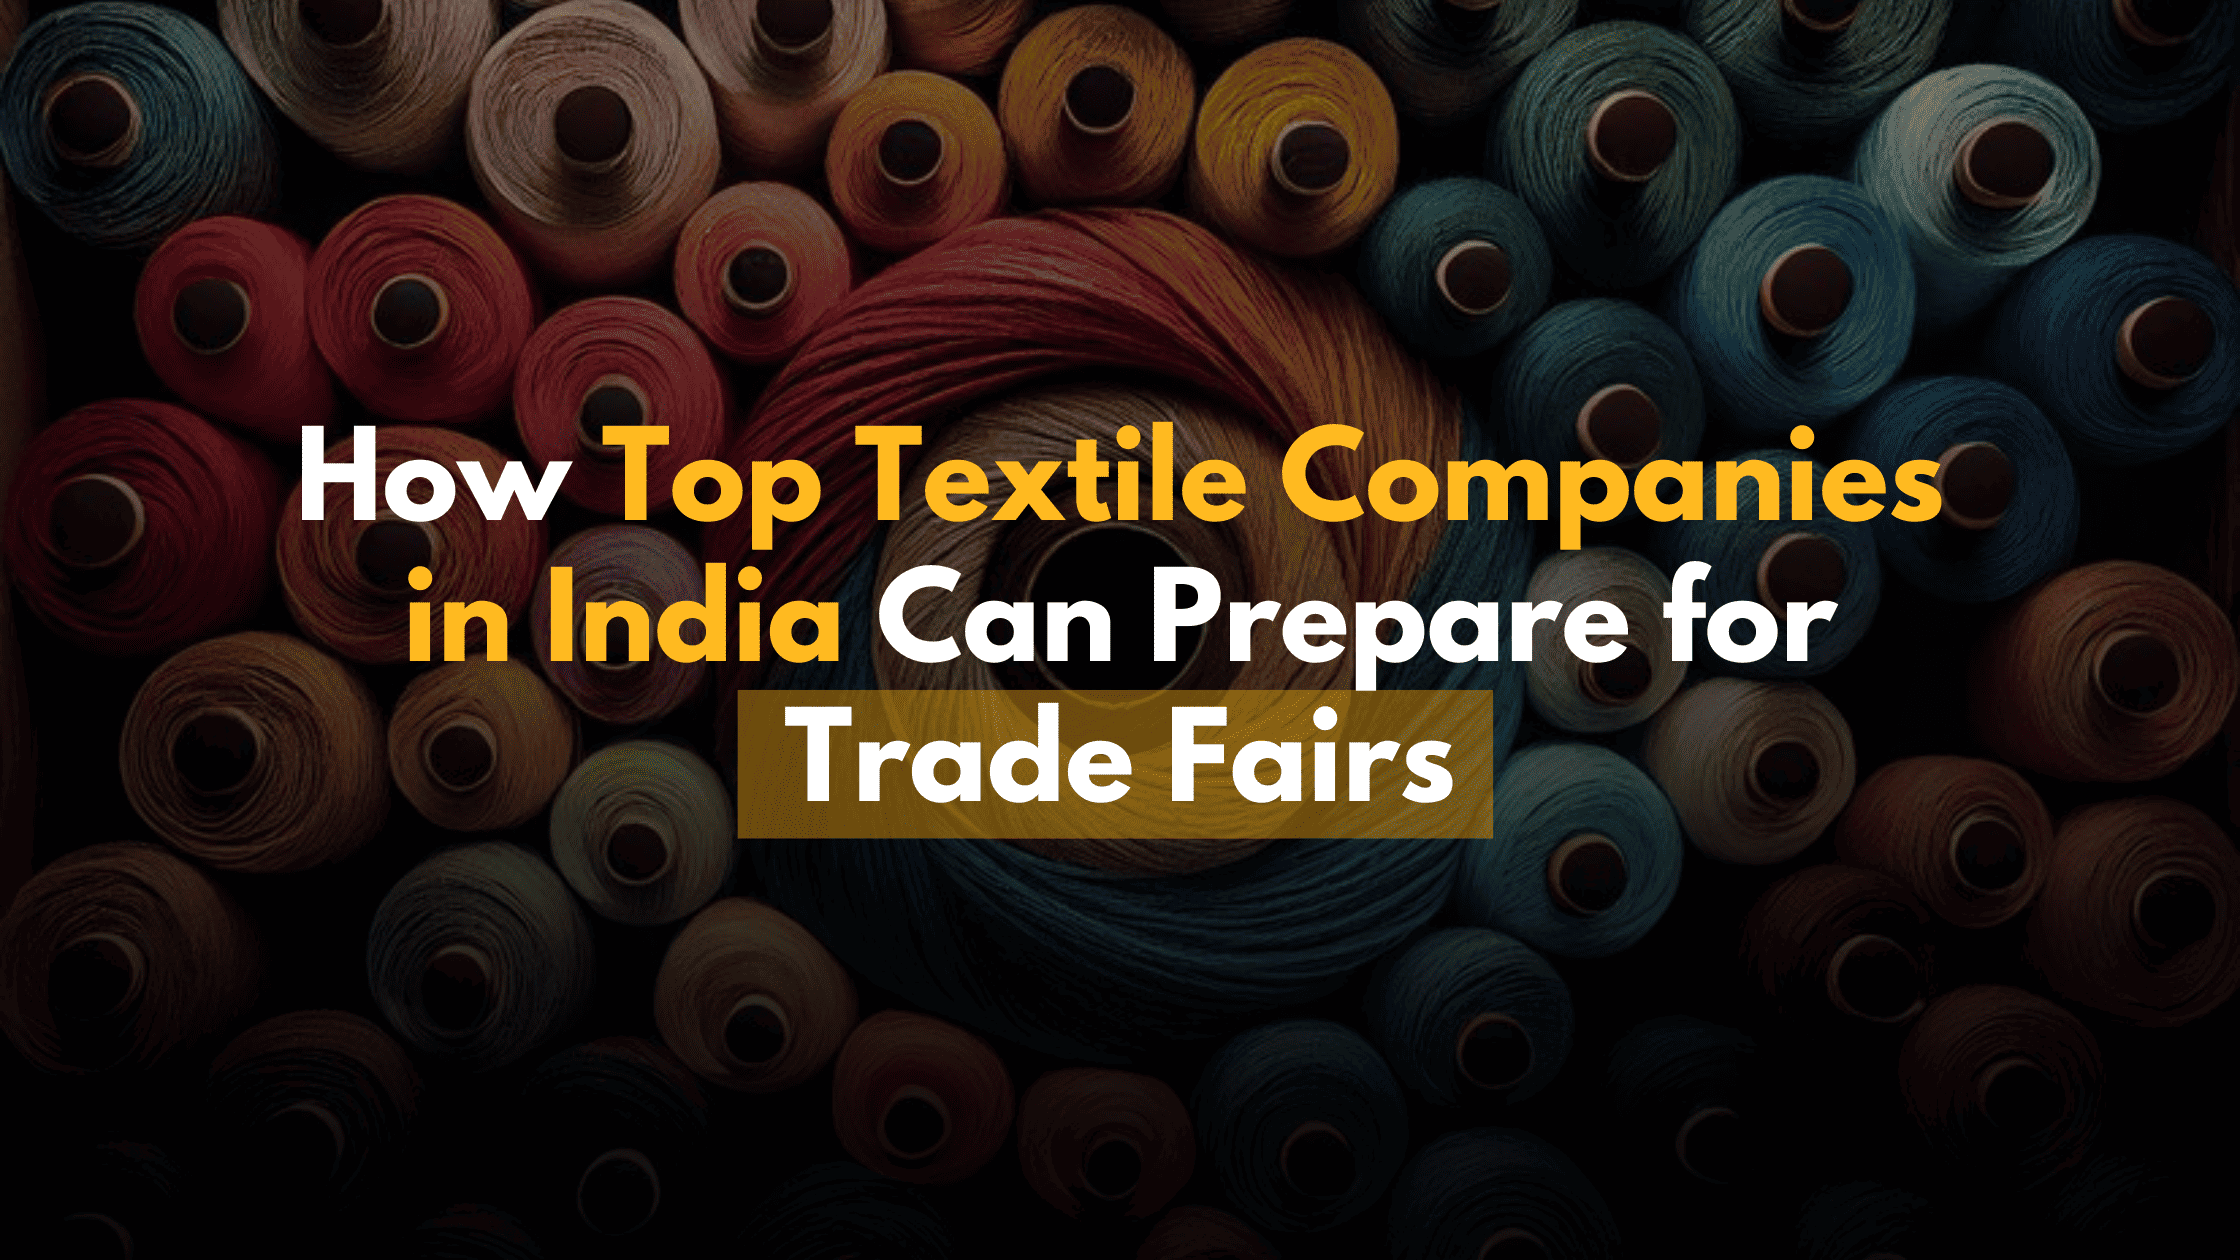 Top Textile Companies in India